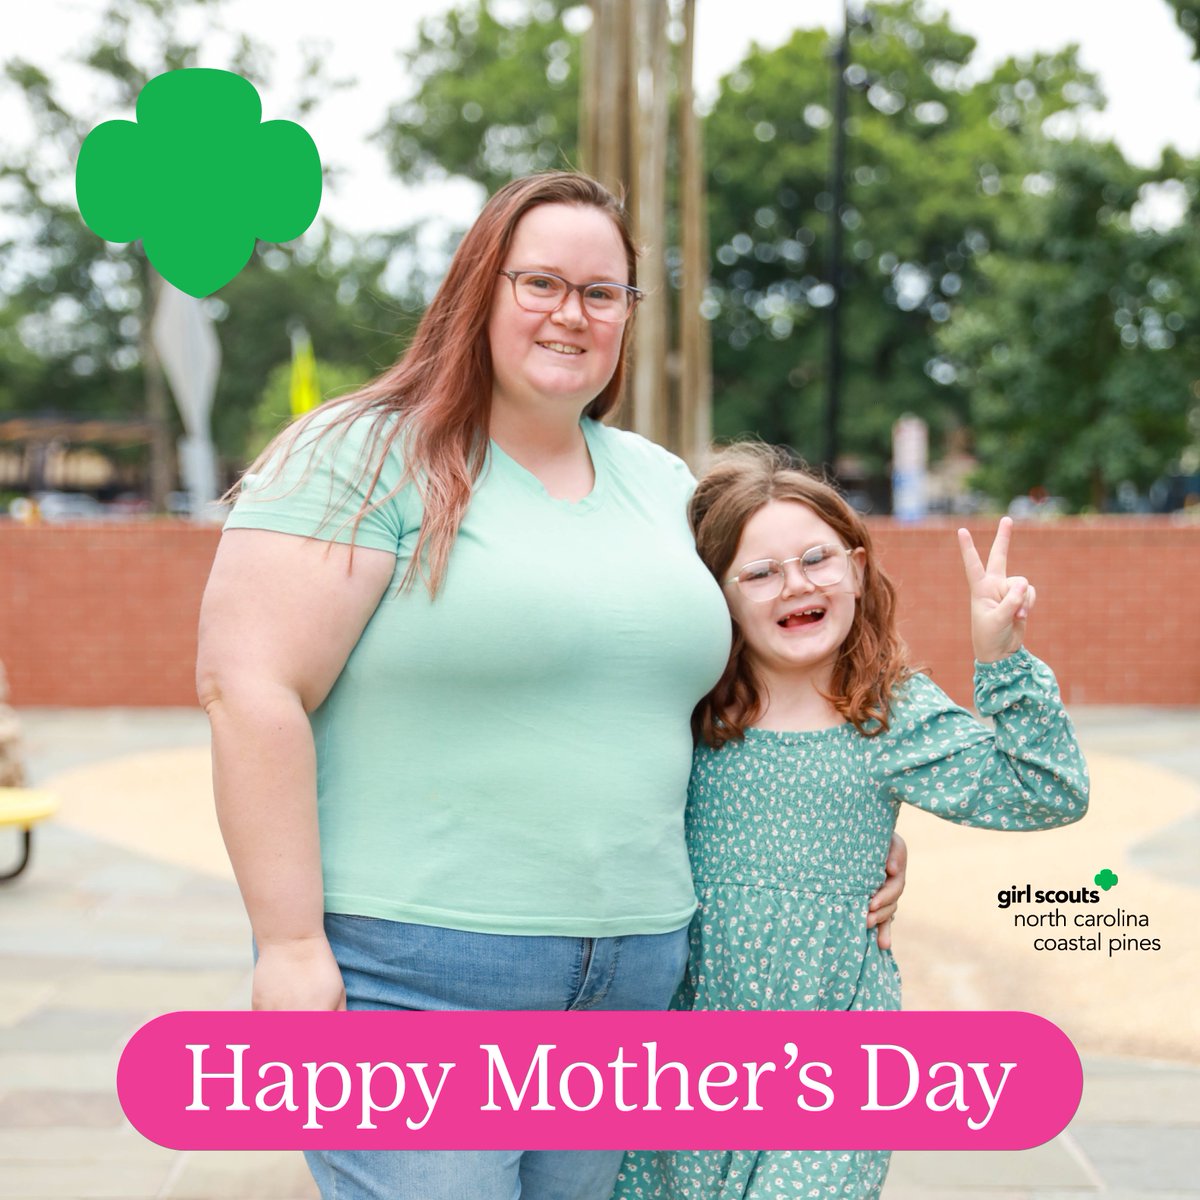 Happy Mothers Day to all of our amazing Girl Scout Moms! 🌼 Your strength and guidance inspire us everyday 💚

Drop one word you would use to describe your mom in the comments ⬇️

#MothersDay #GSNCCP #GirlScouts #NC #happymothersday